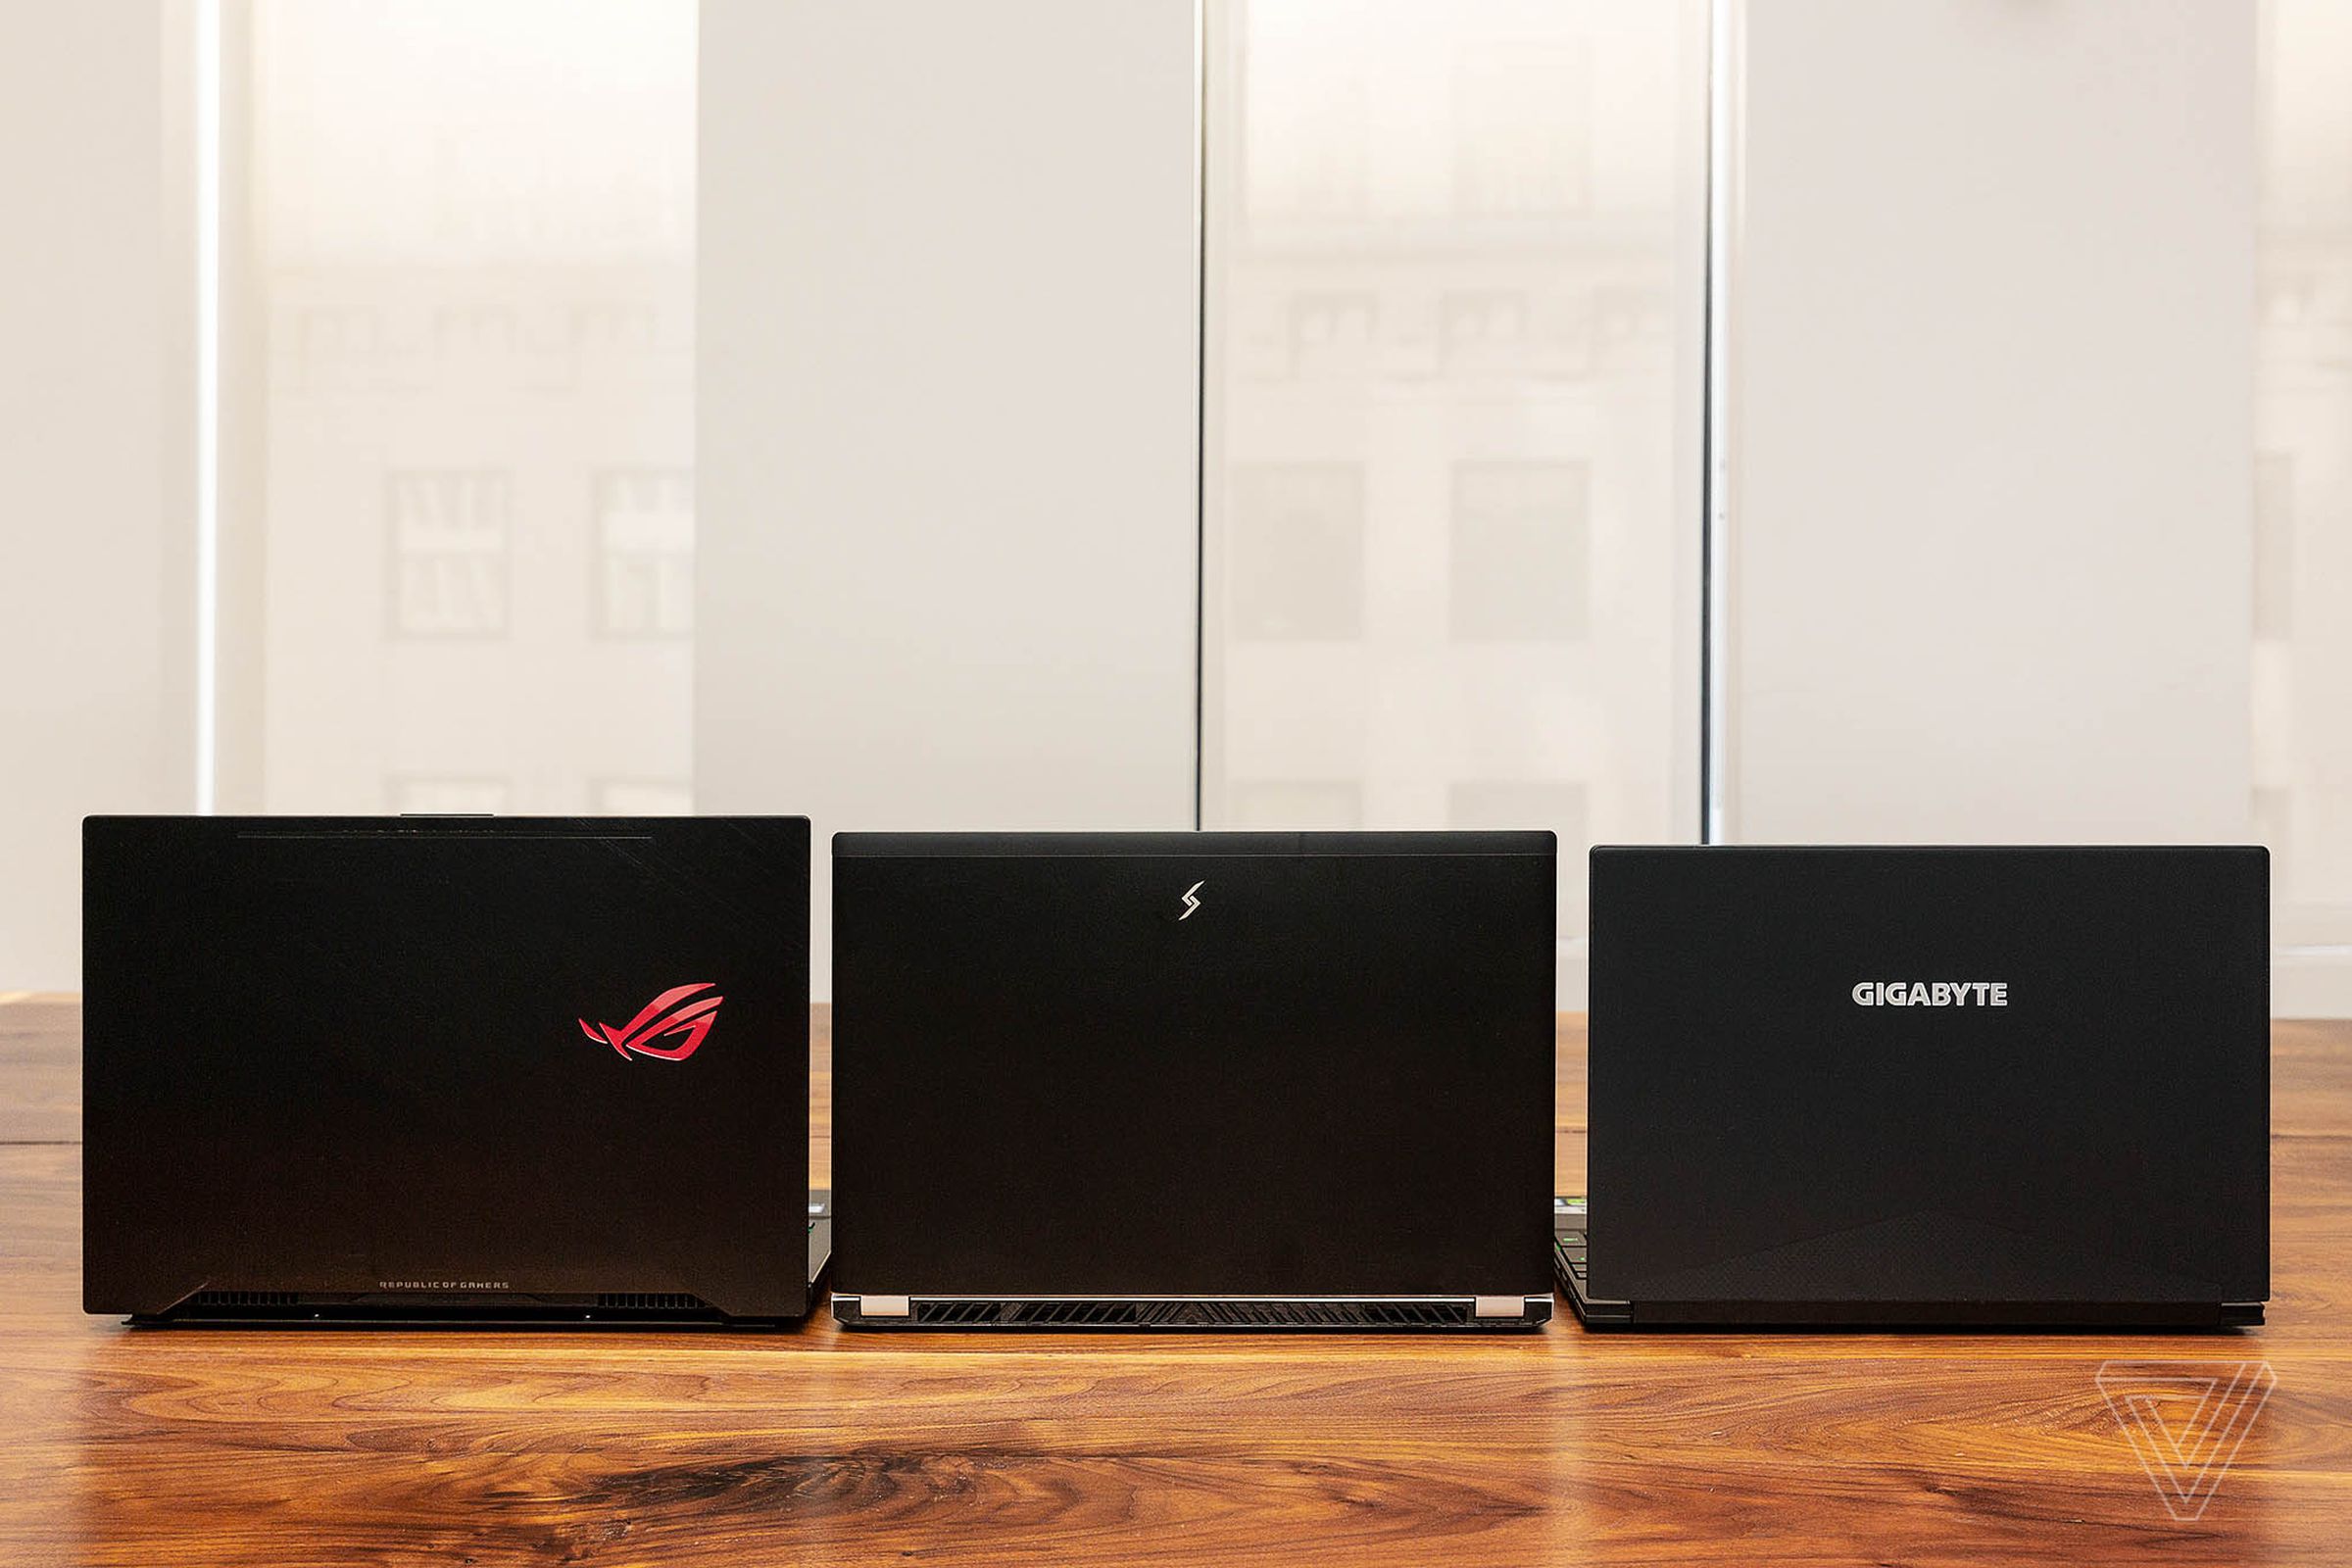 Asus (left), Digital Storm (middle), and Gigabyte (right).